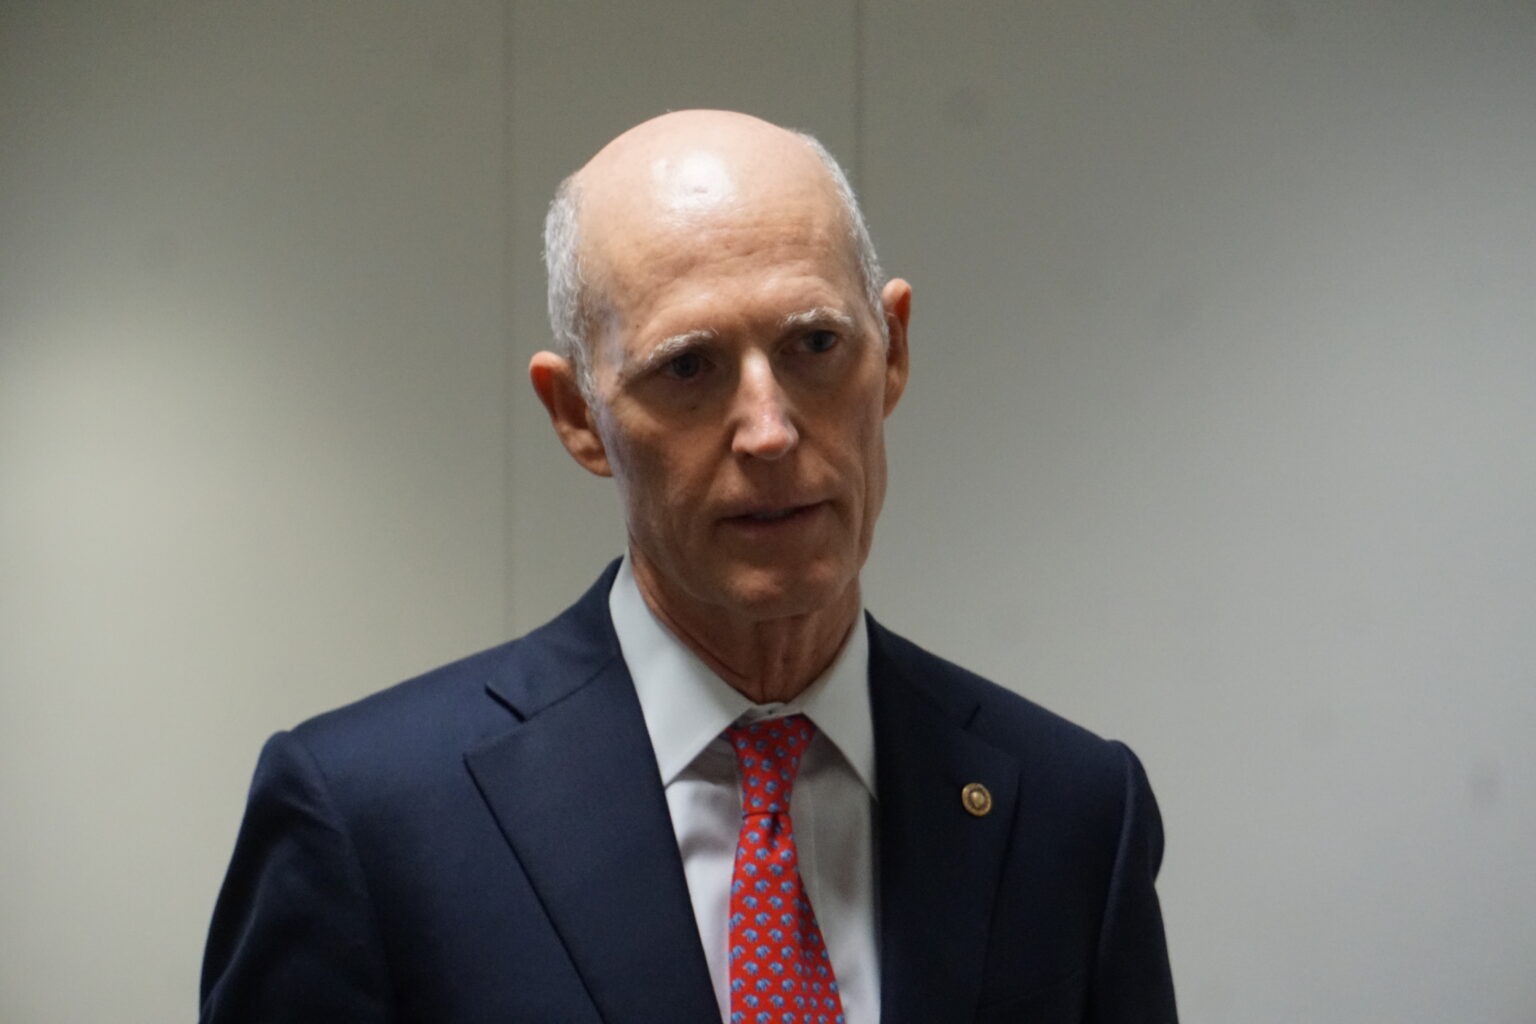 Scott Demands Investigation into China's Influence on Federal Reserve